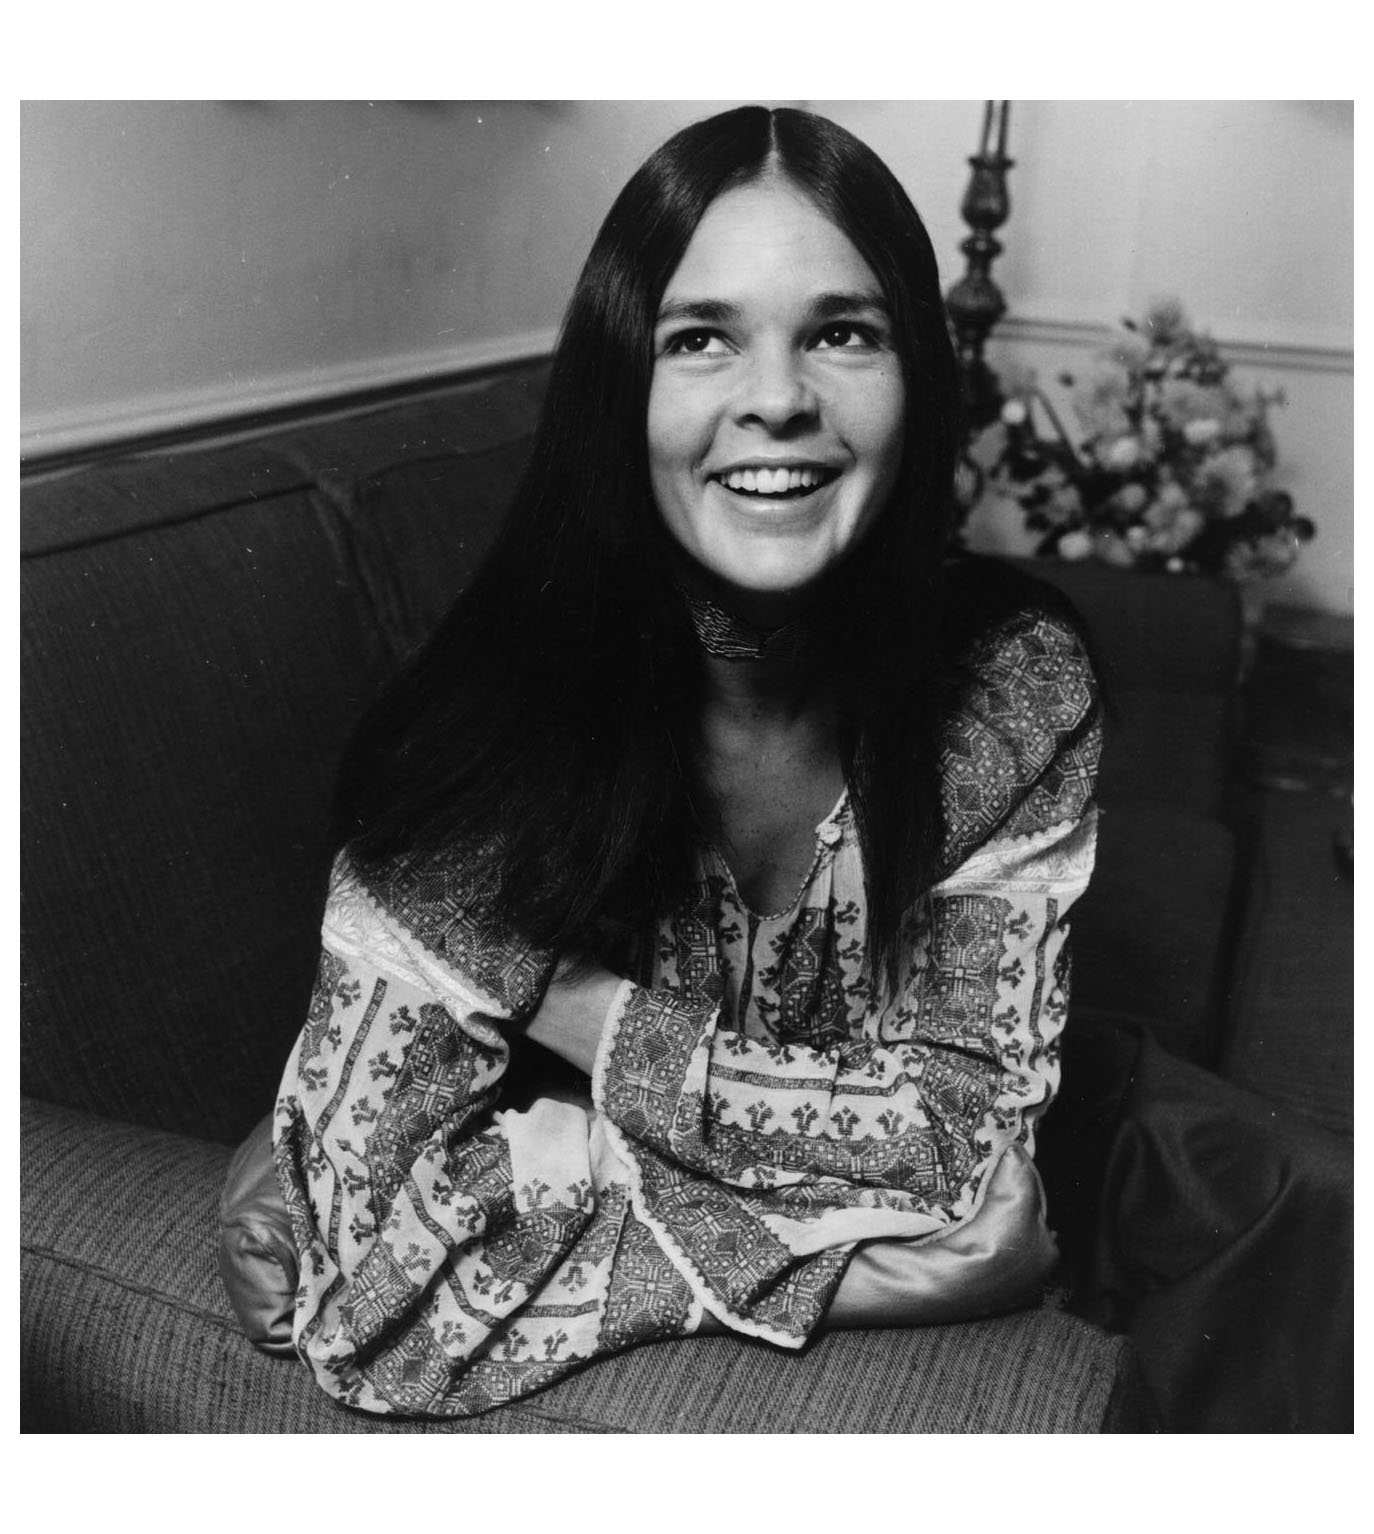 dalena allen add is katie lee related to ali macgraw photo